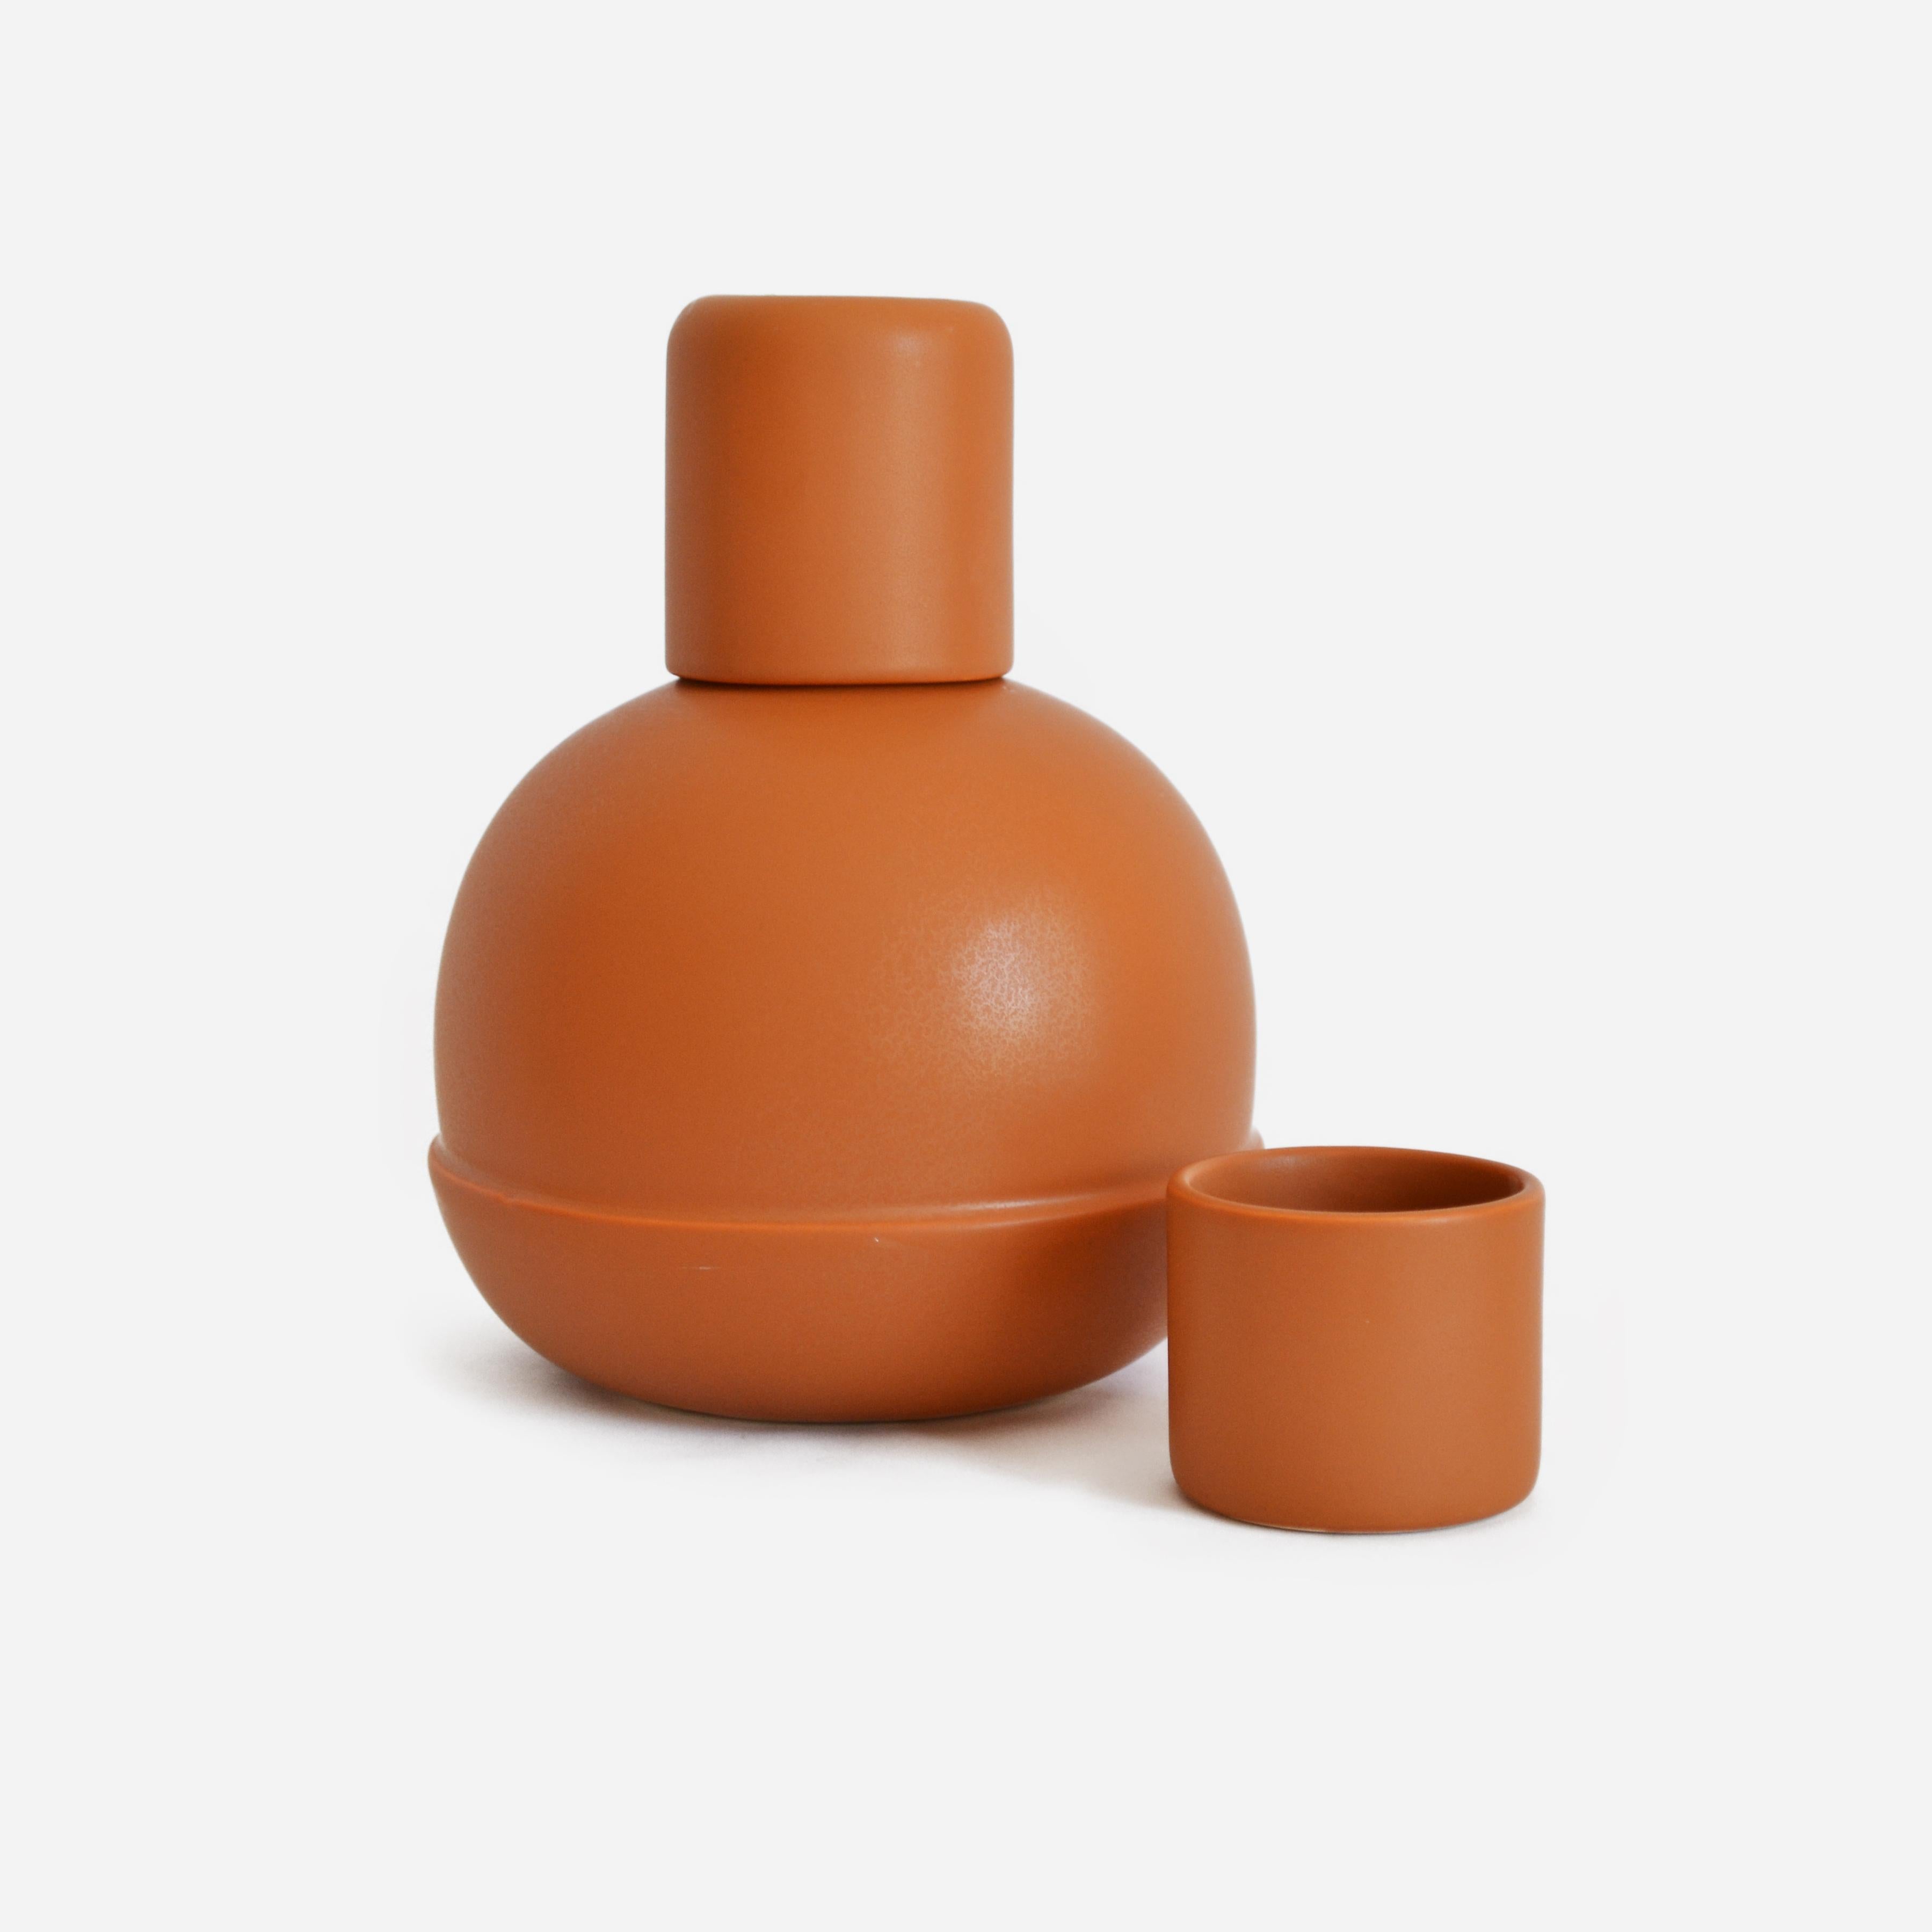 Mexican Orange Ceramic Carafe and Cups Inspired in traditional Pitchers from Mexico.  For Sale